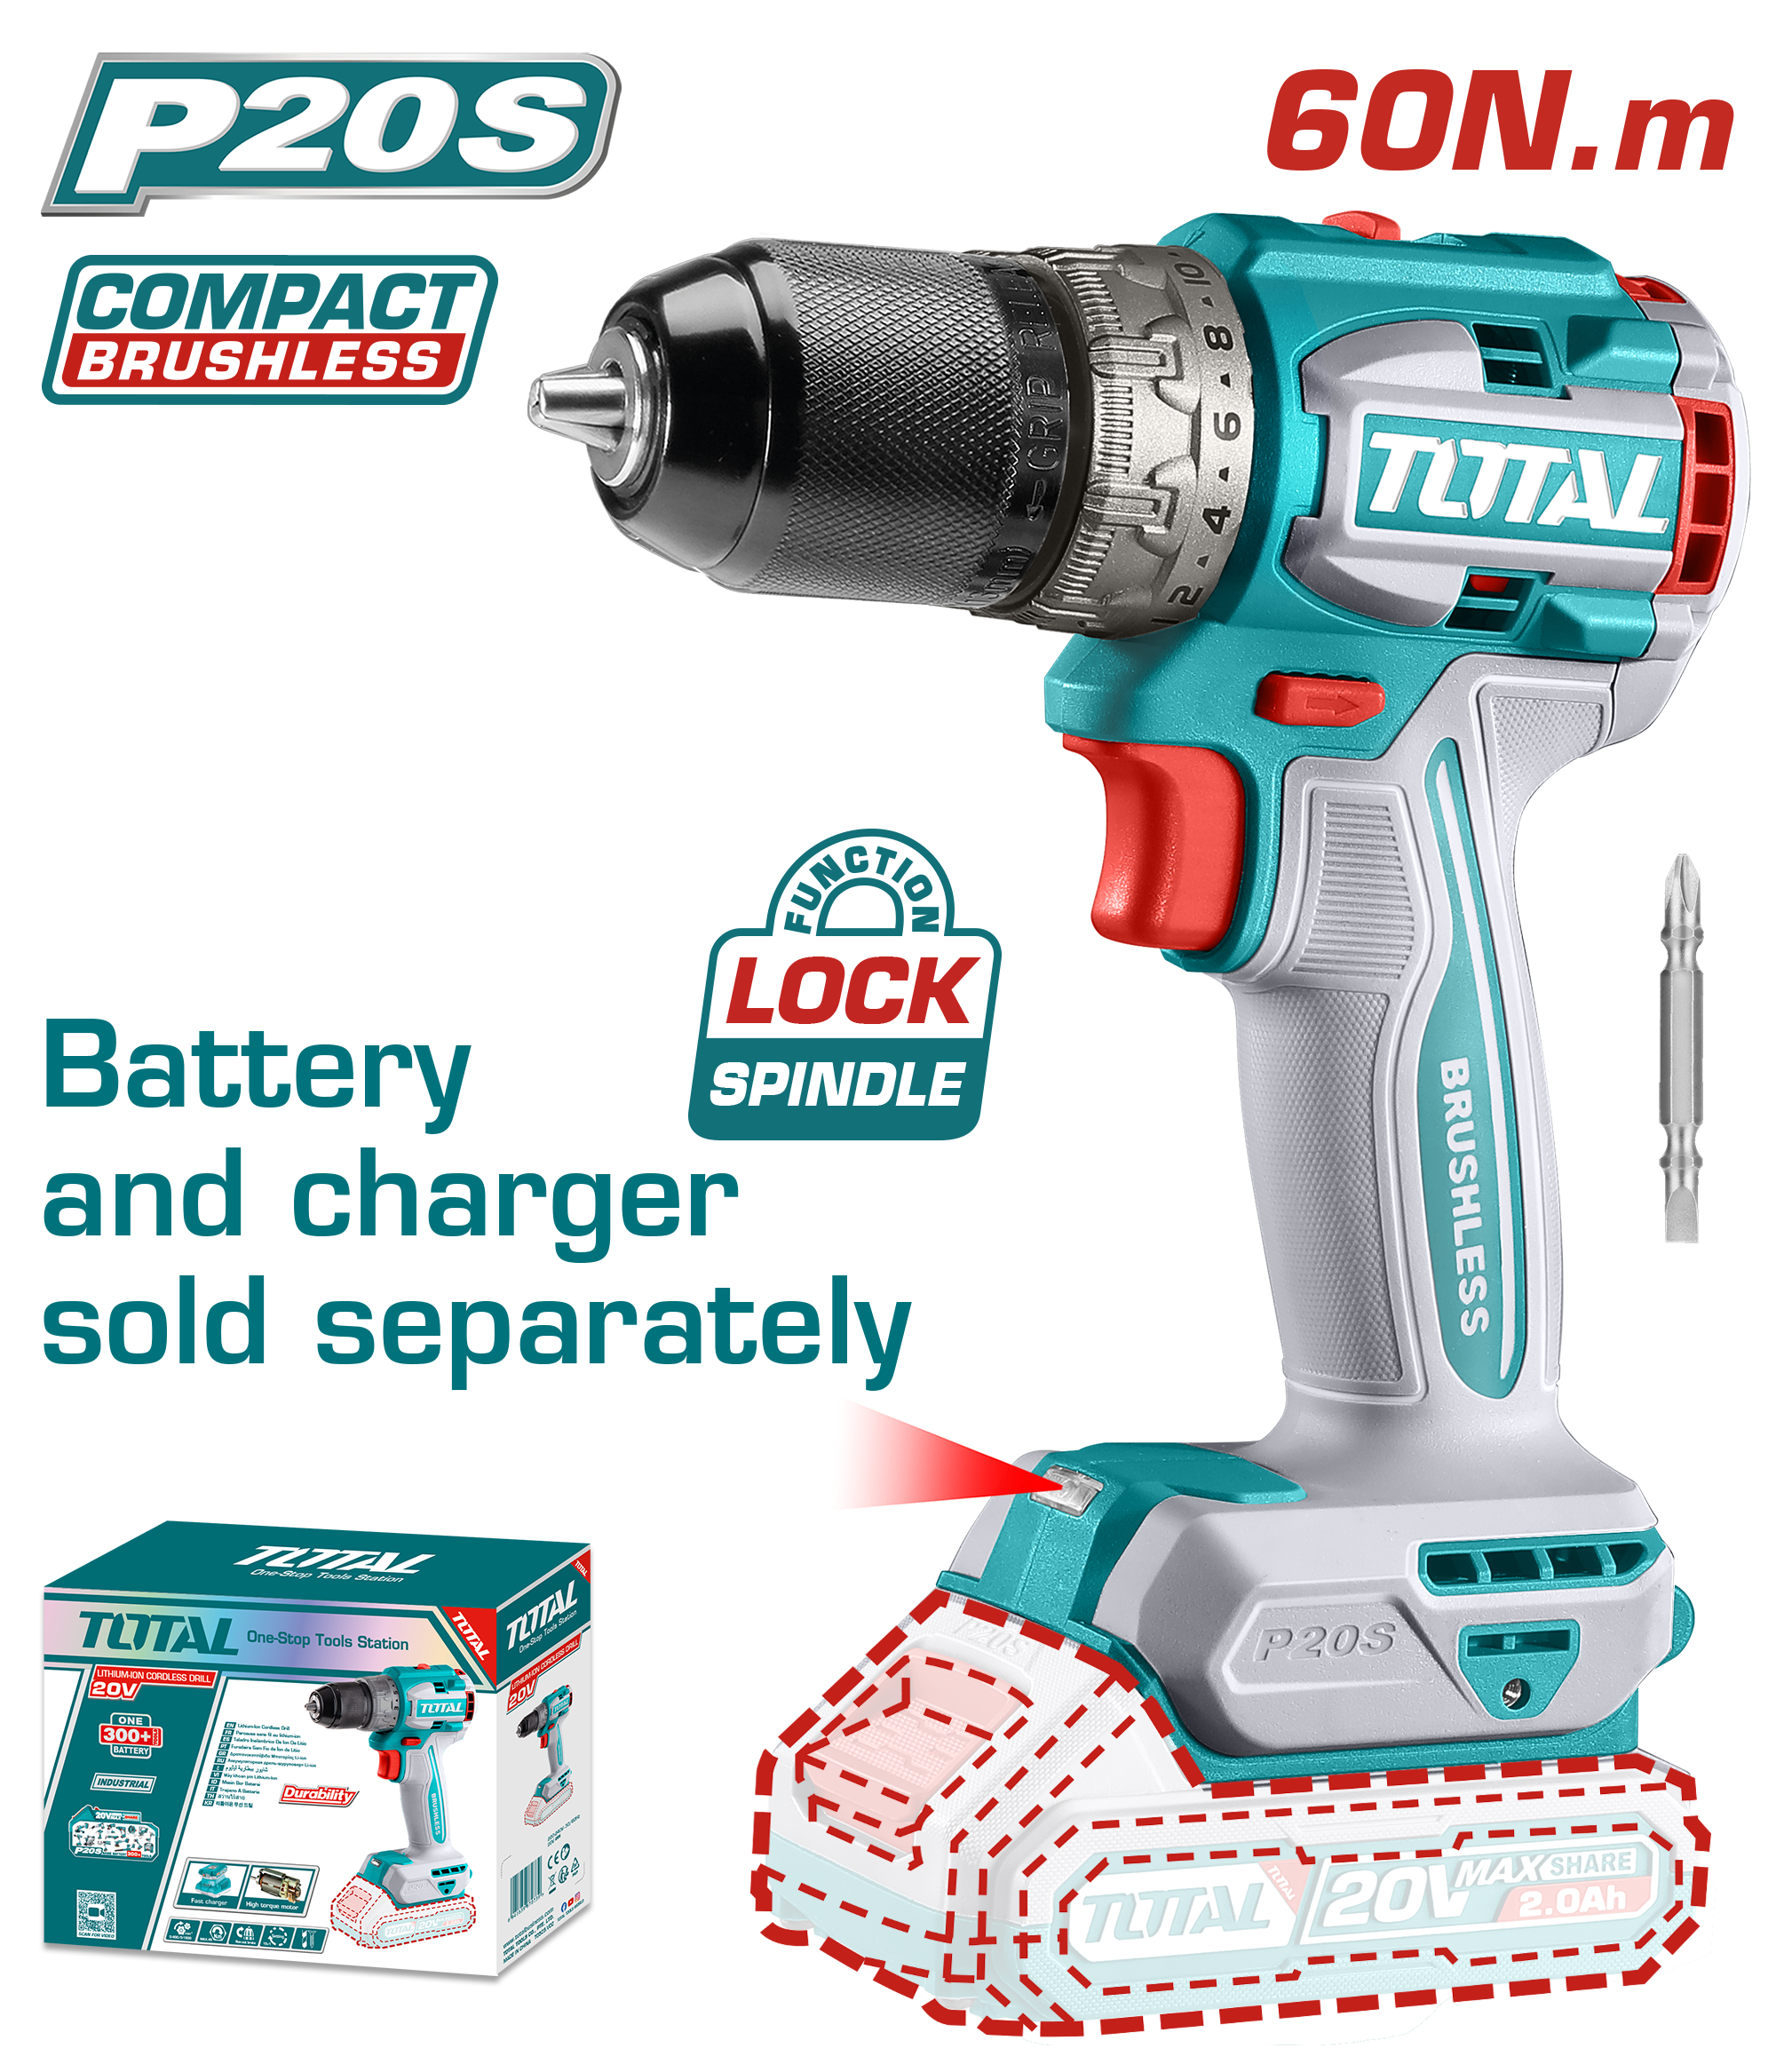 BRUSHLESS CORDLESS DRILL 60 NM WITHOUT BATTERY AND CHARGER